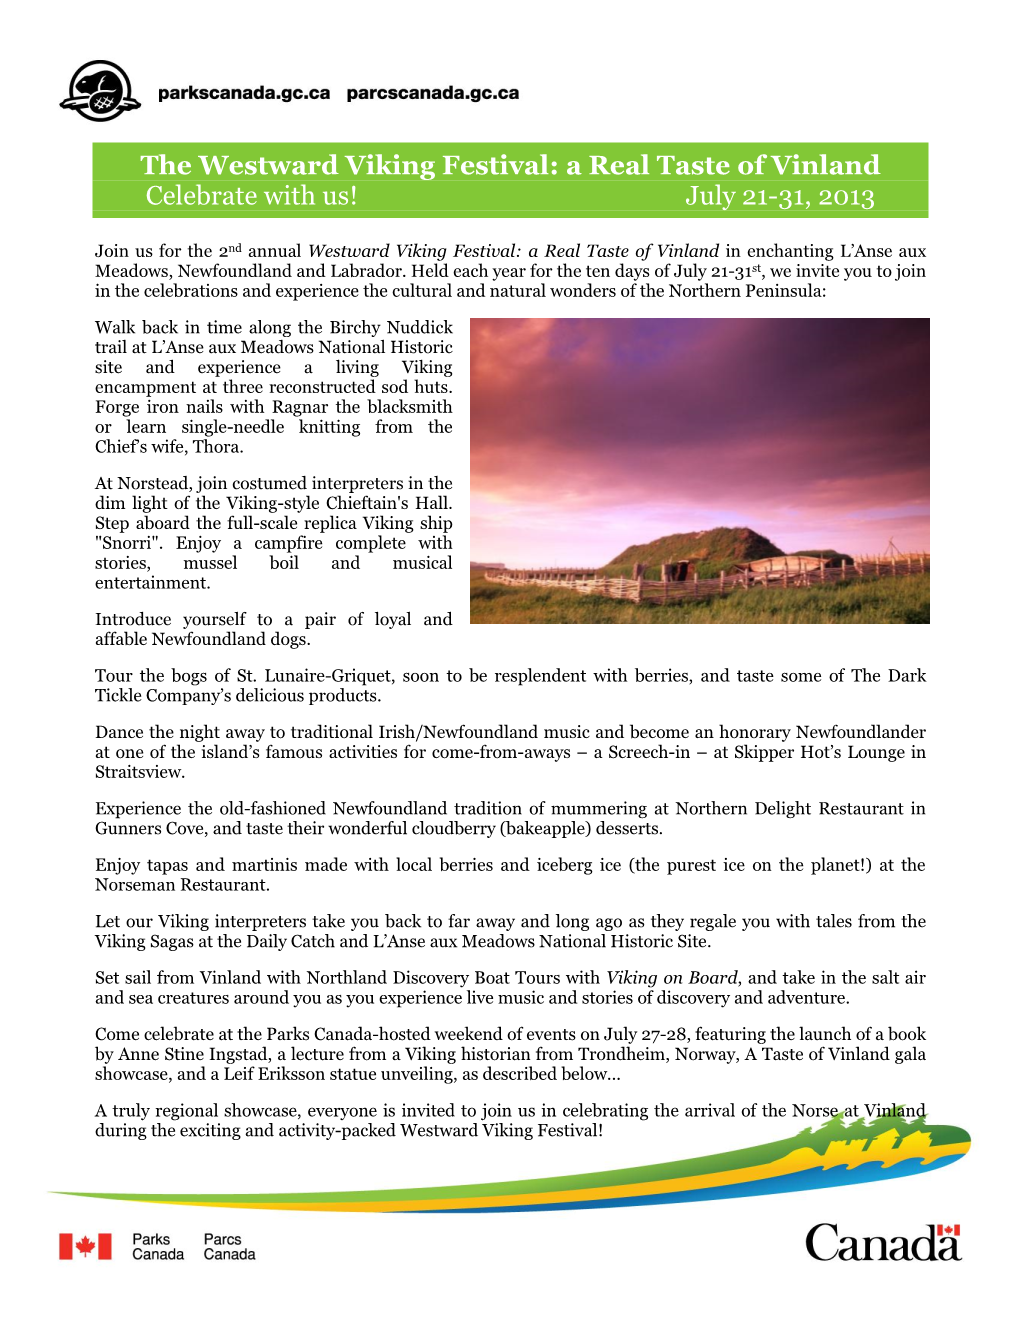 The Westward Viking Festival: a Real Taste of Vinland Celebrate with Us! July 21-31, 2013